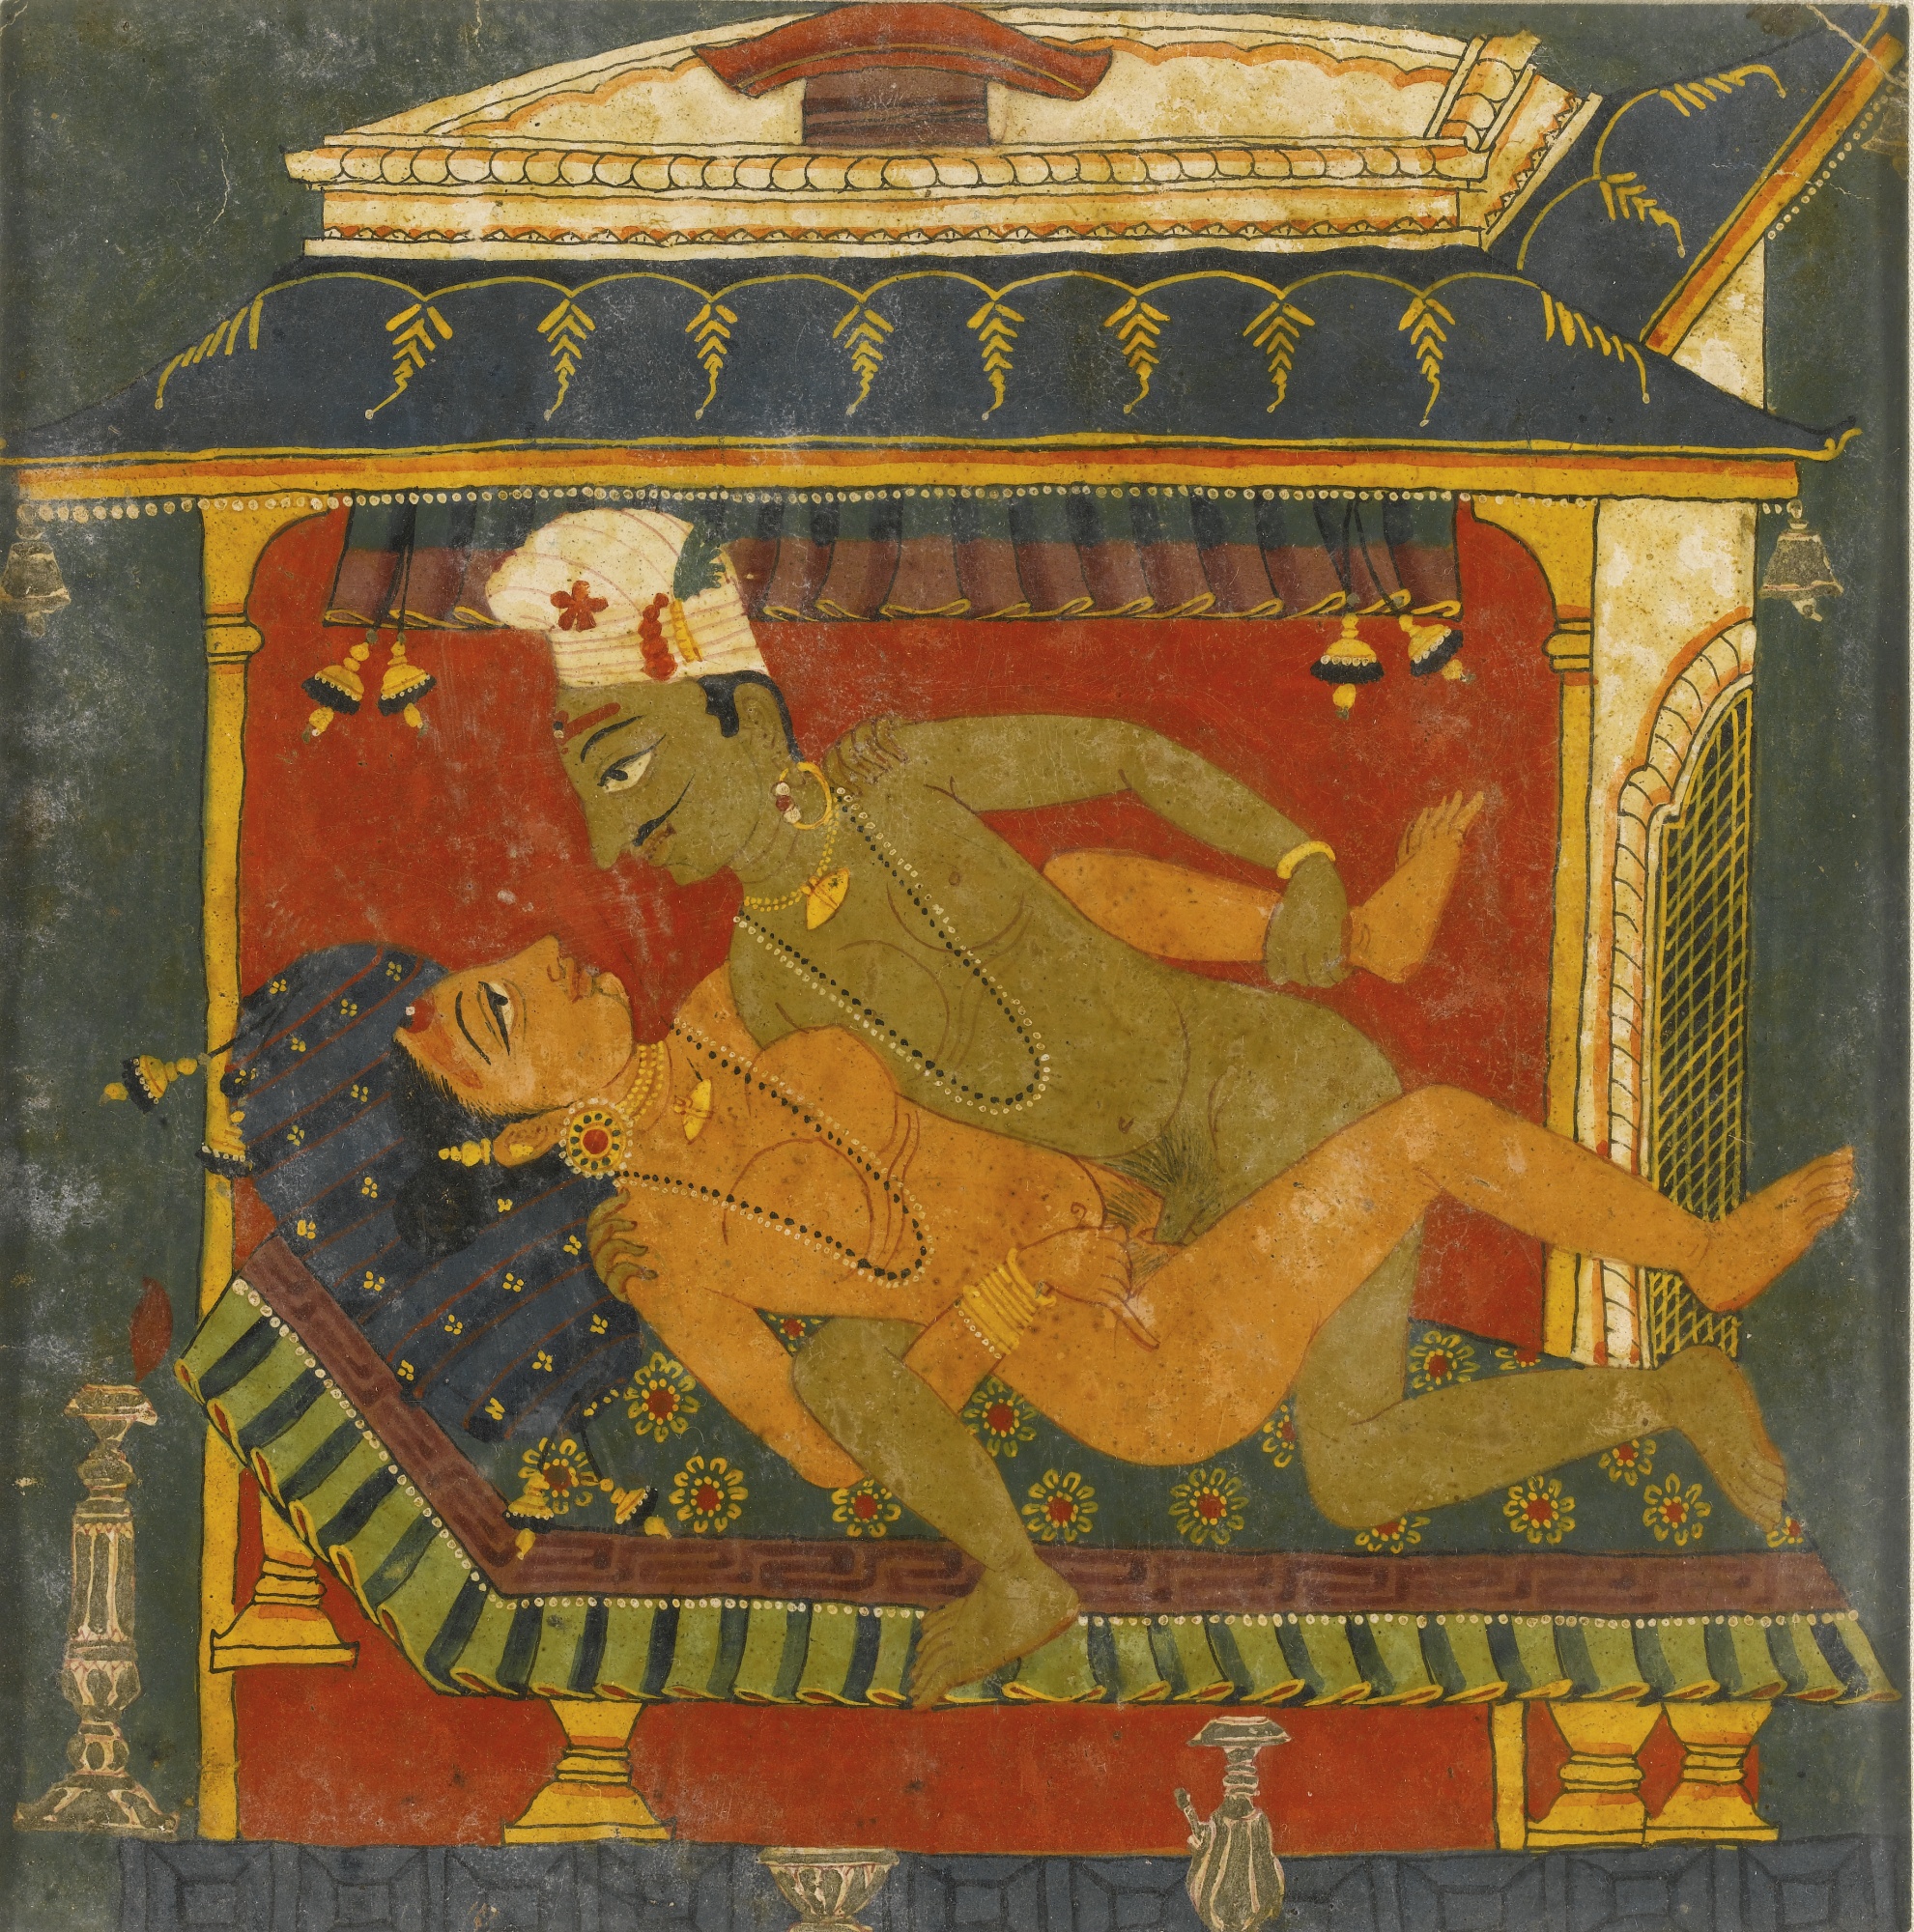 Lovers Engaged in Lovemaking on a Bed - Miniature Painting, Nepal, Bhaktapur, circa 1675